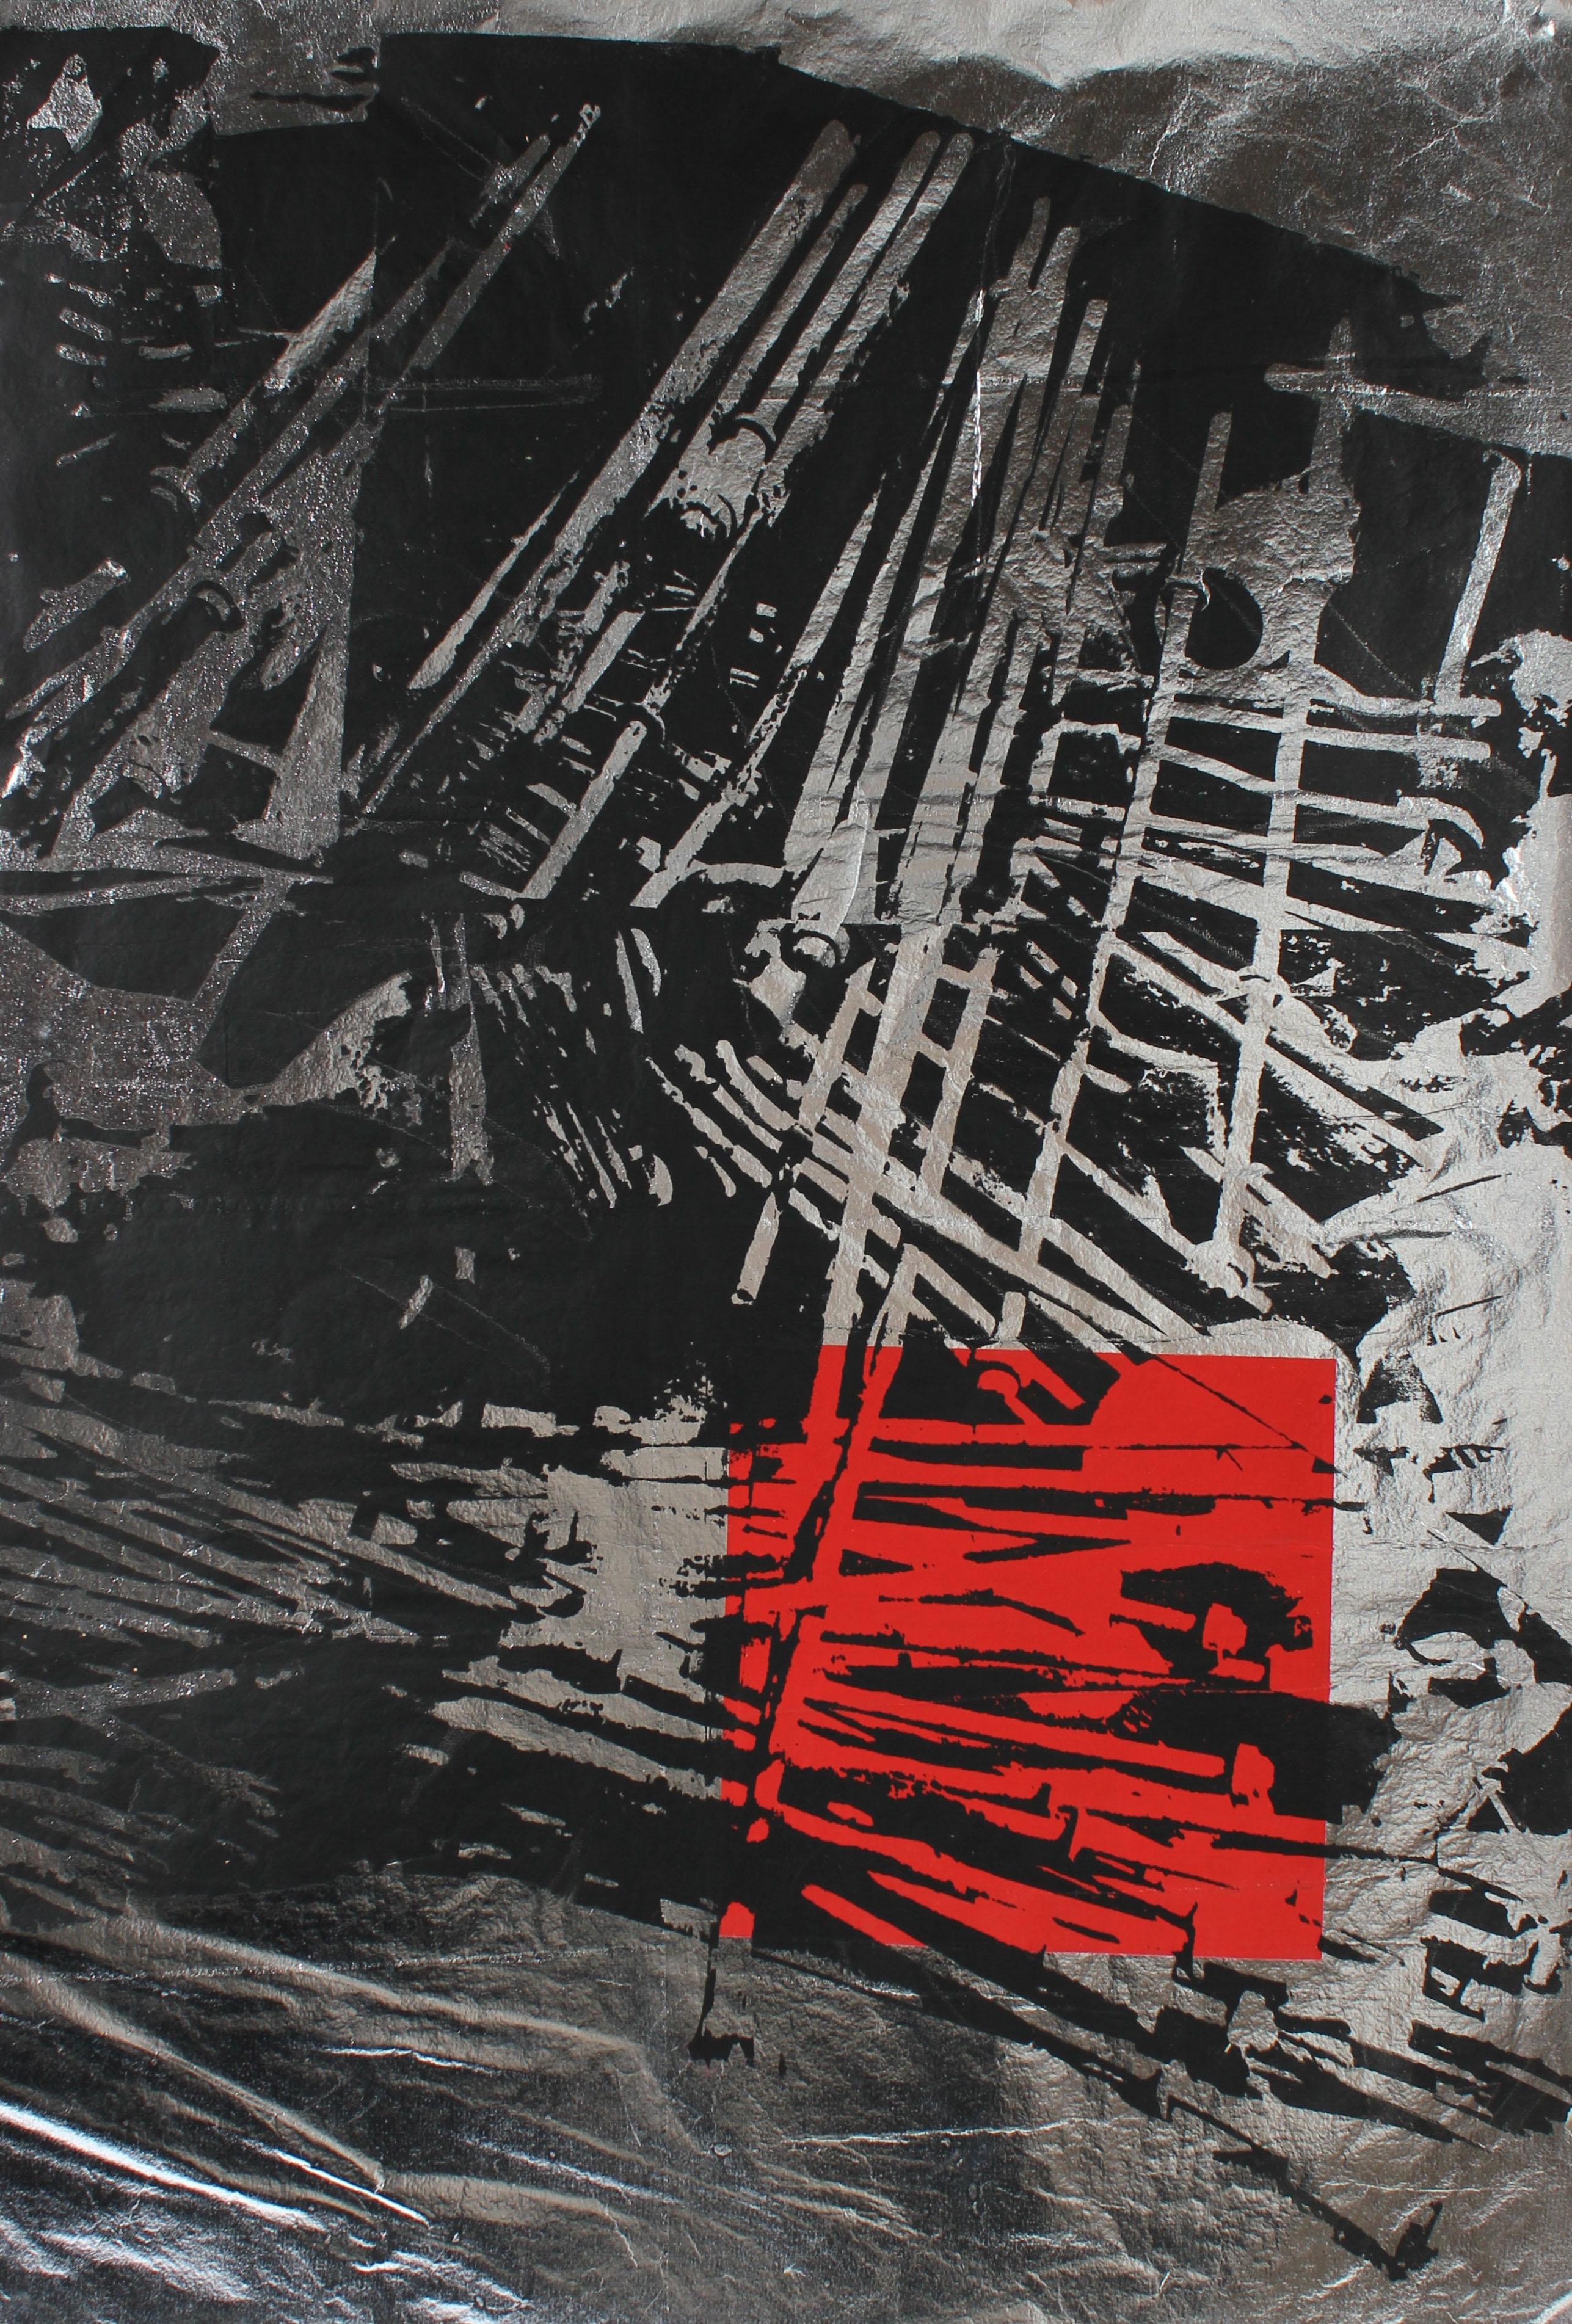 Graphic Serigraph in Black and Red on Silver Paper, circa 1970's